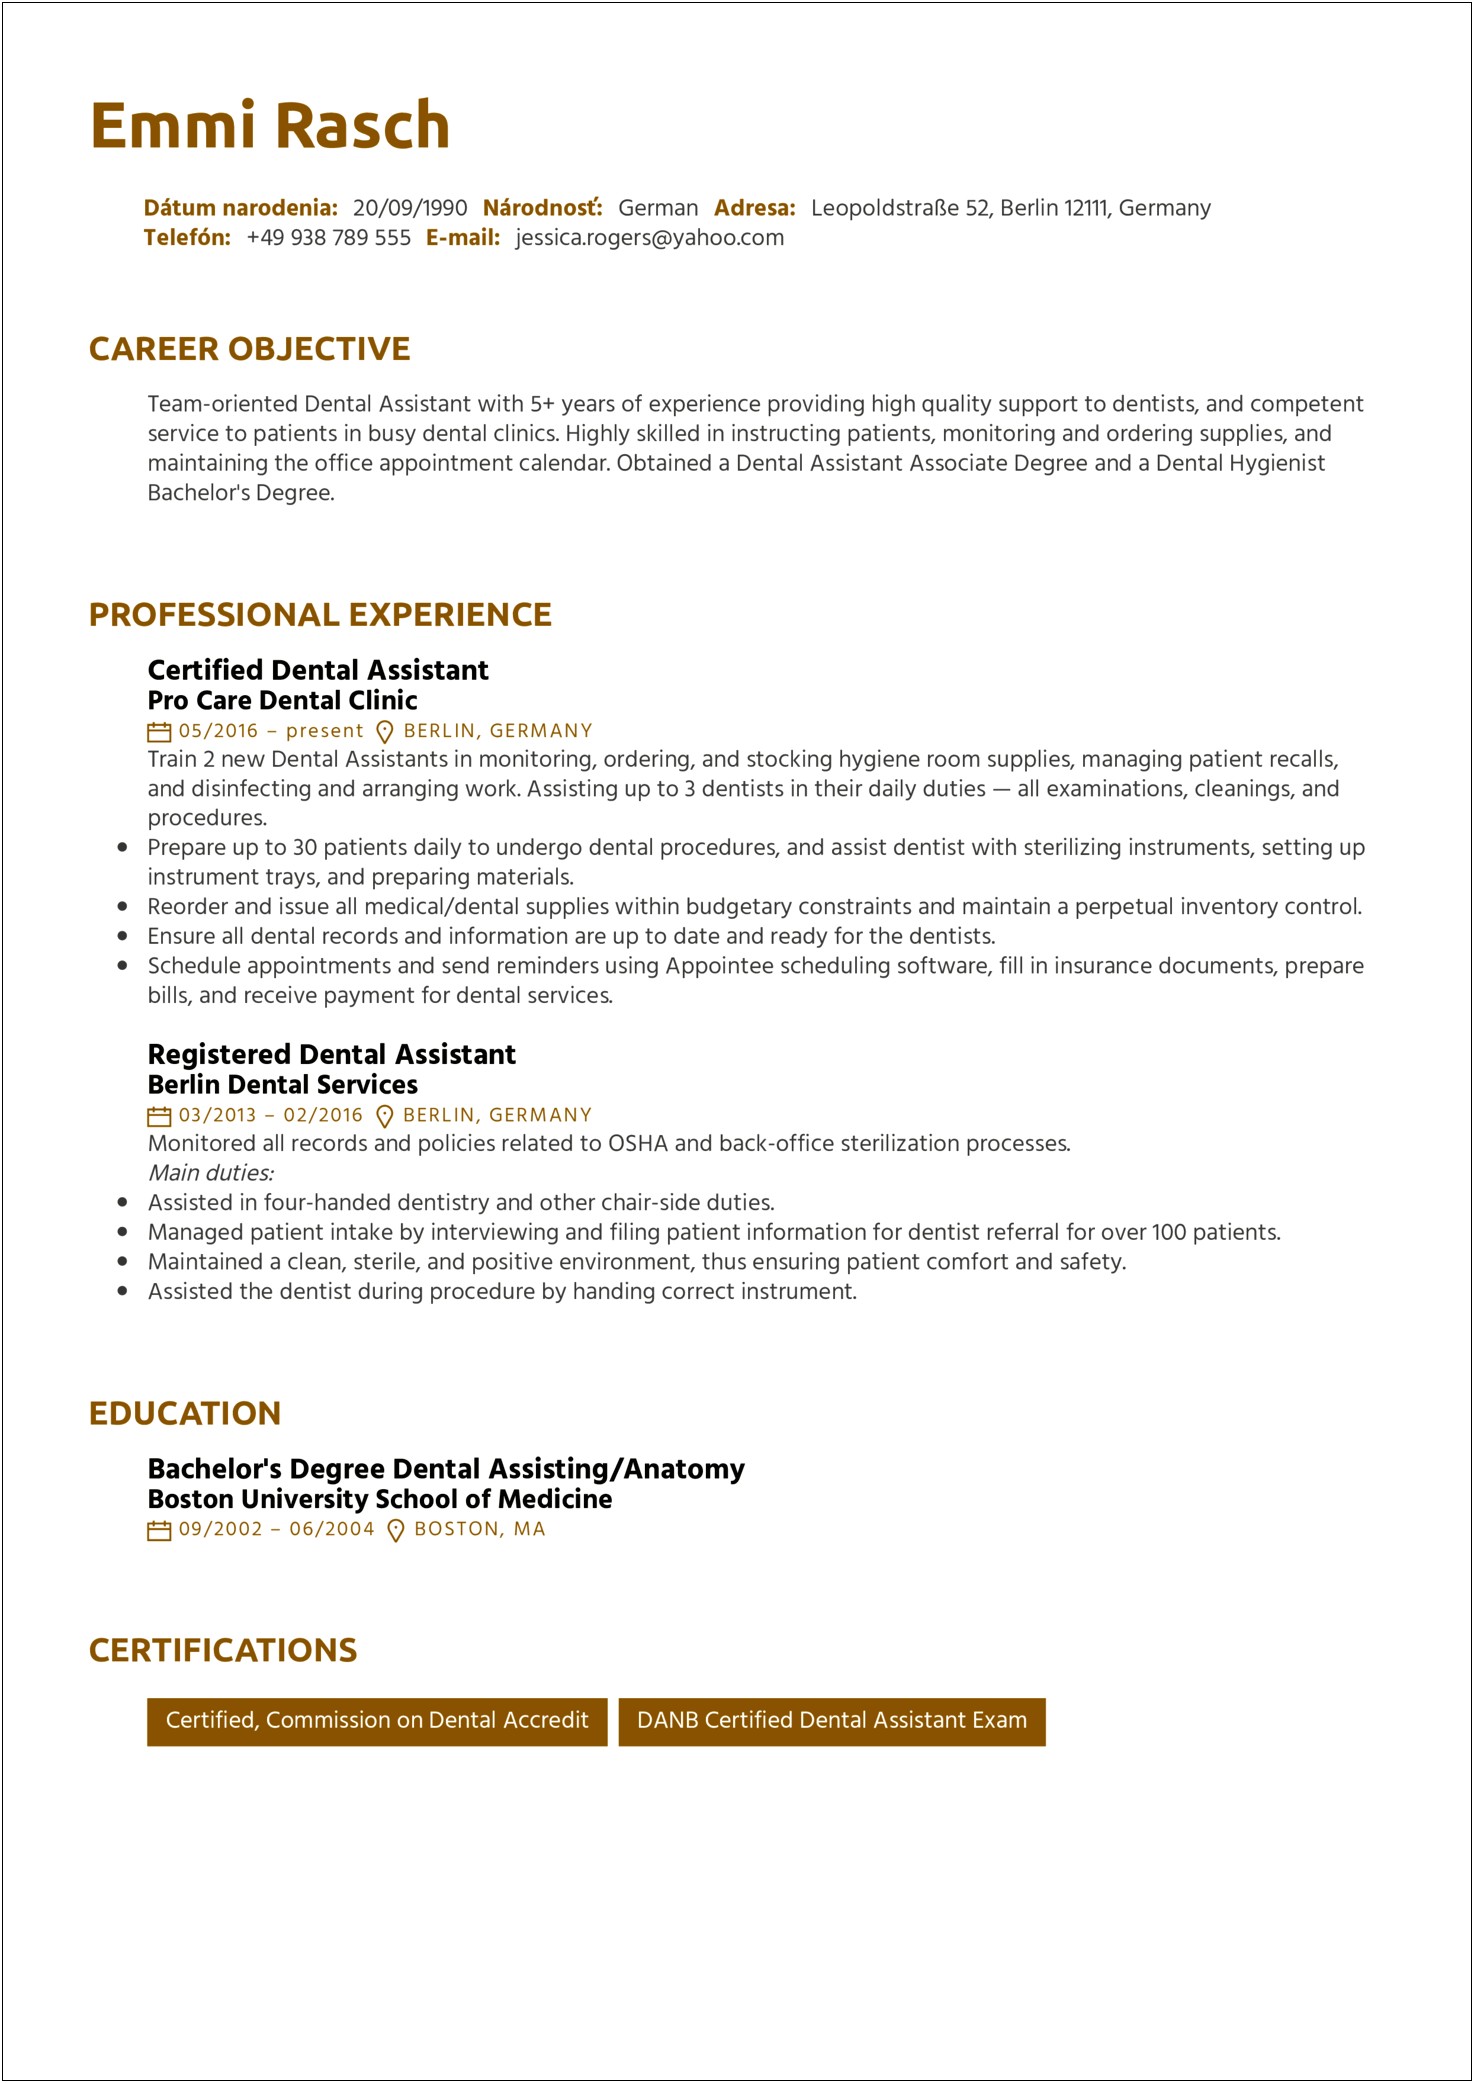 Sample Dental Assistant Resume With Picture